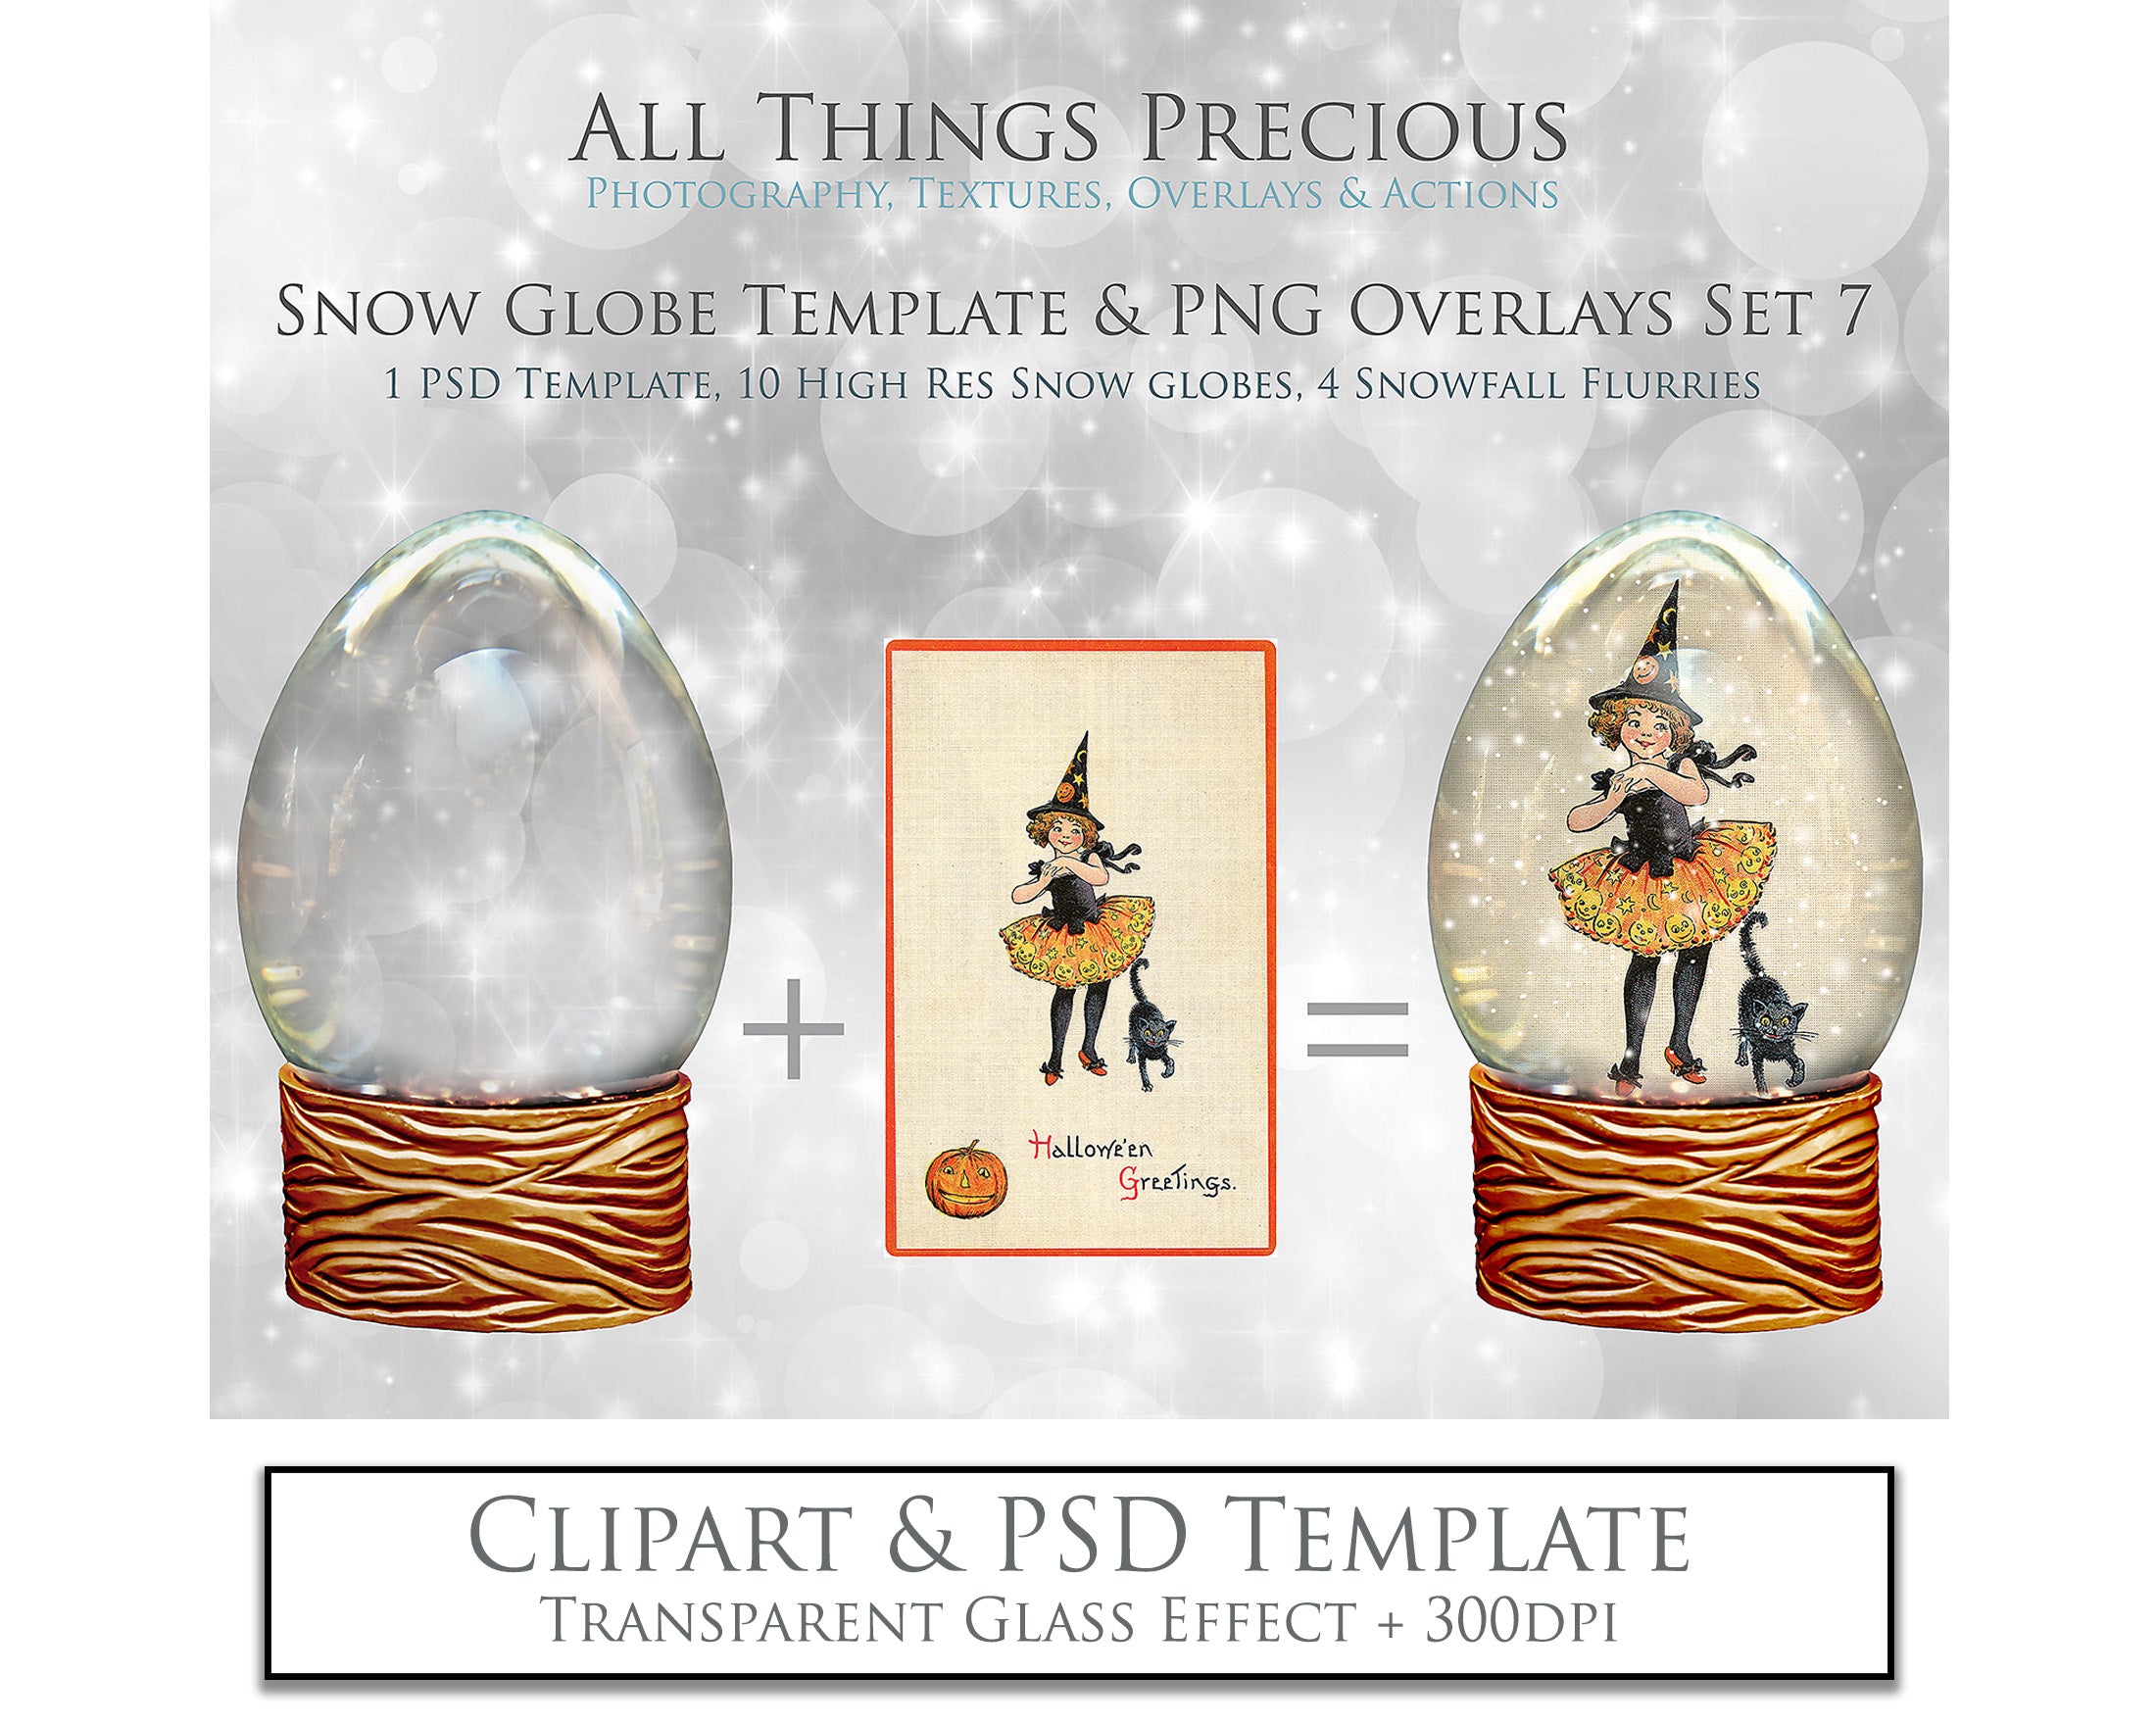 Digital Snow Globe Clipart and Background with snow Overlays and a PSD Template included in the set.The globe is transparent, perfect to add your own images and retain the snow globe effect. Photoshop Photography Background. Printable, Editable for Christmas with Frozen Winter Theme. Glass graphic effects. ATP Textures EASTER EGG SHAPE.